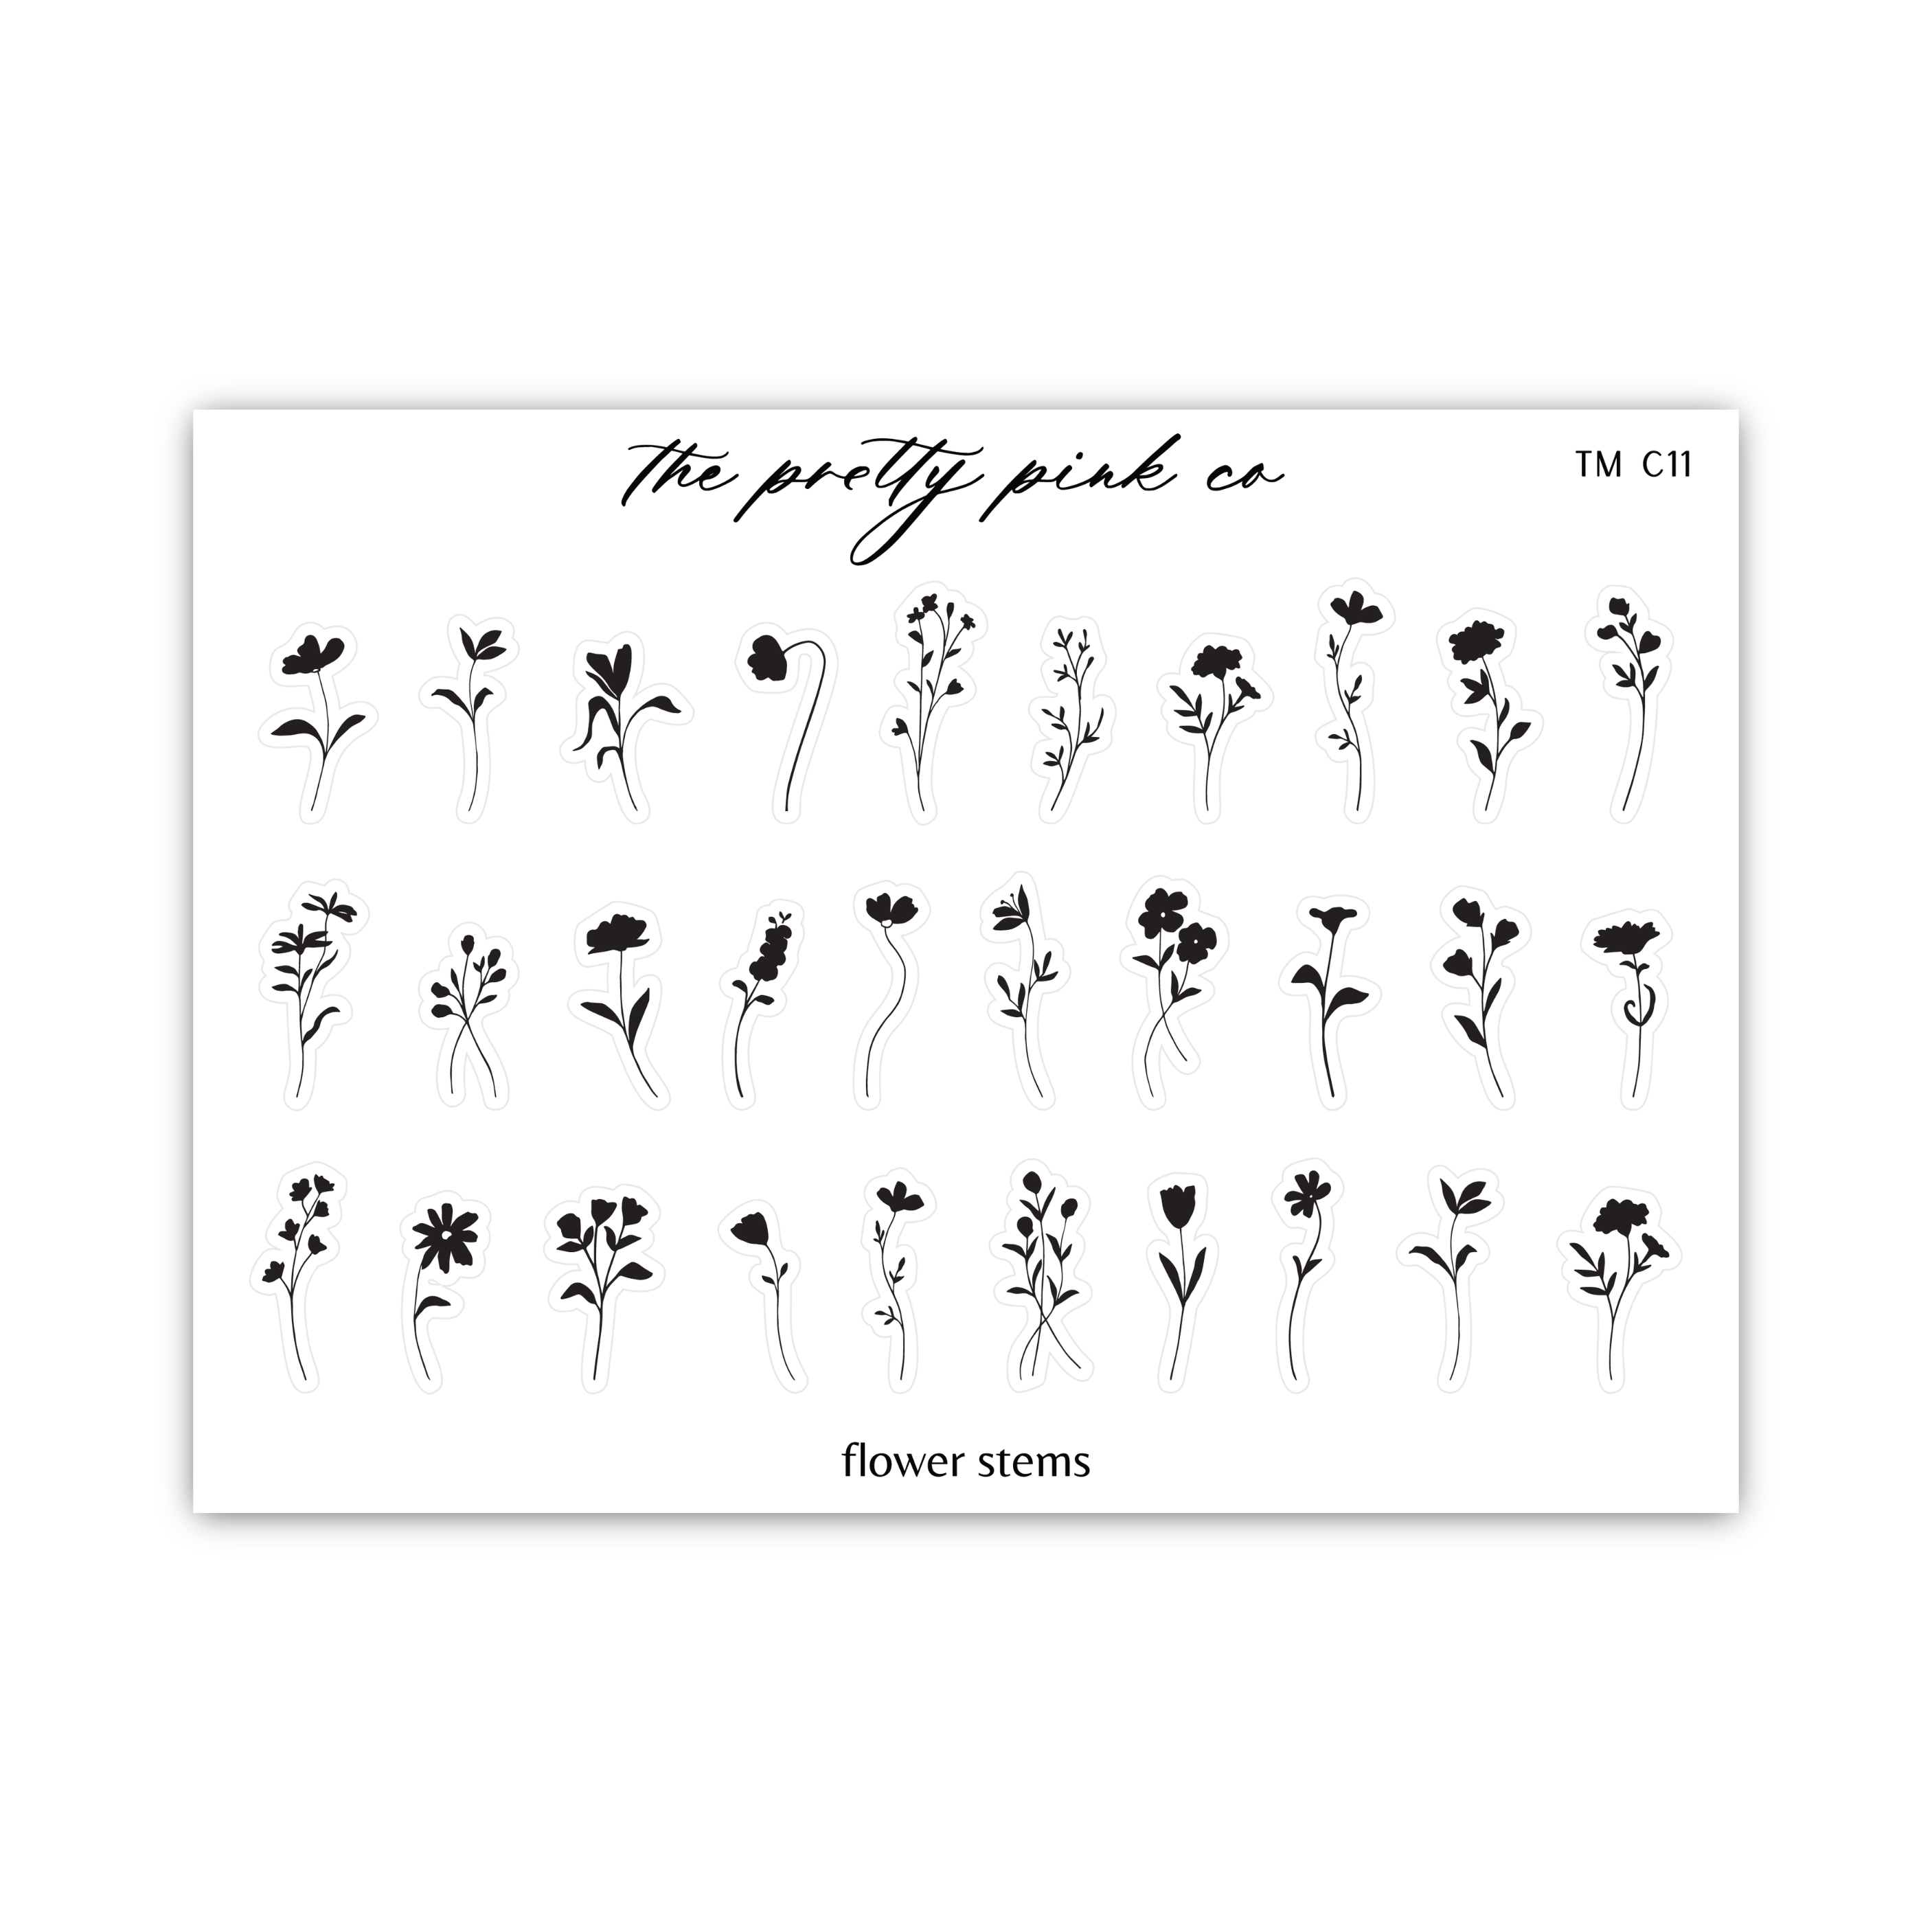 a sheet of flower stems on a white background